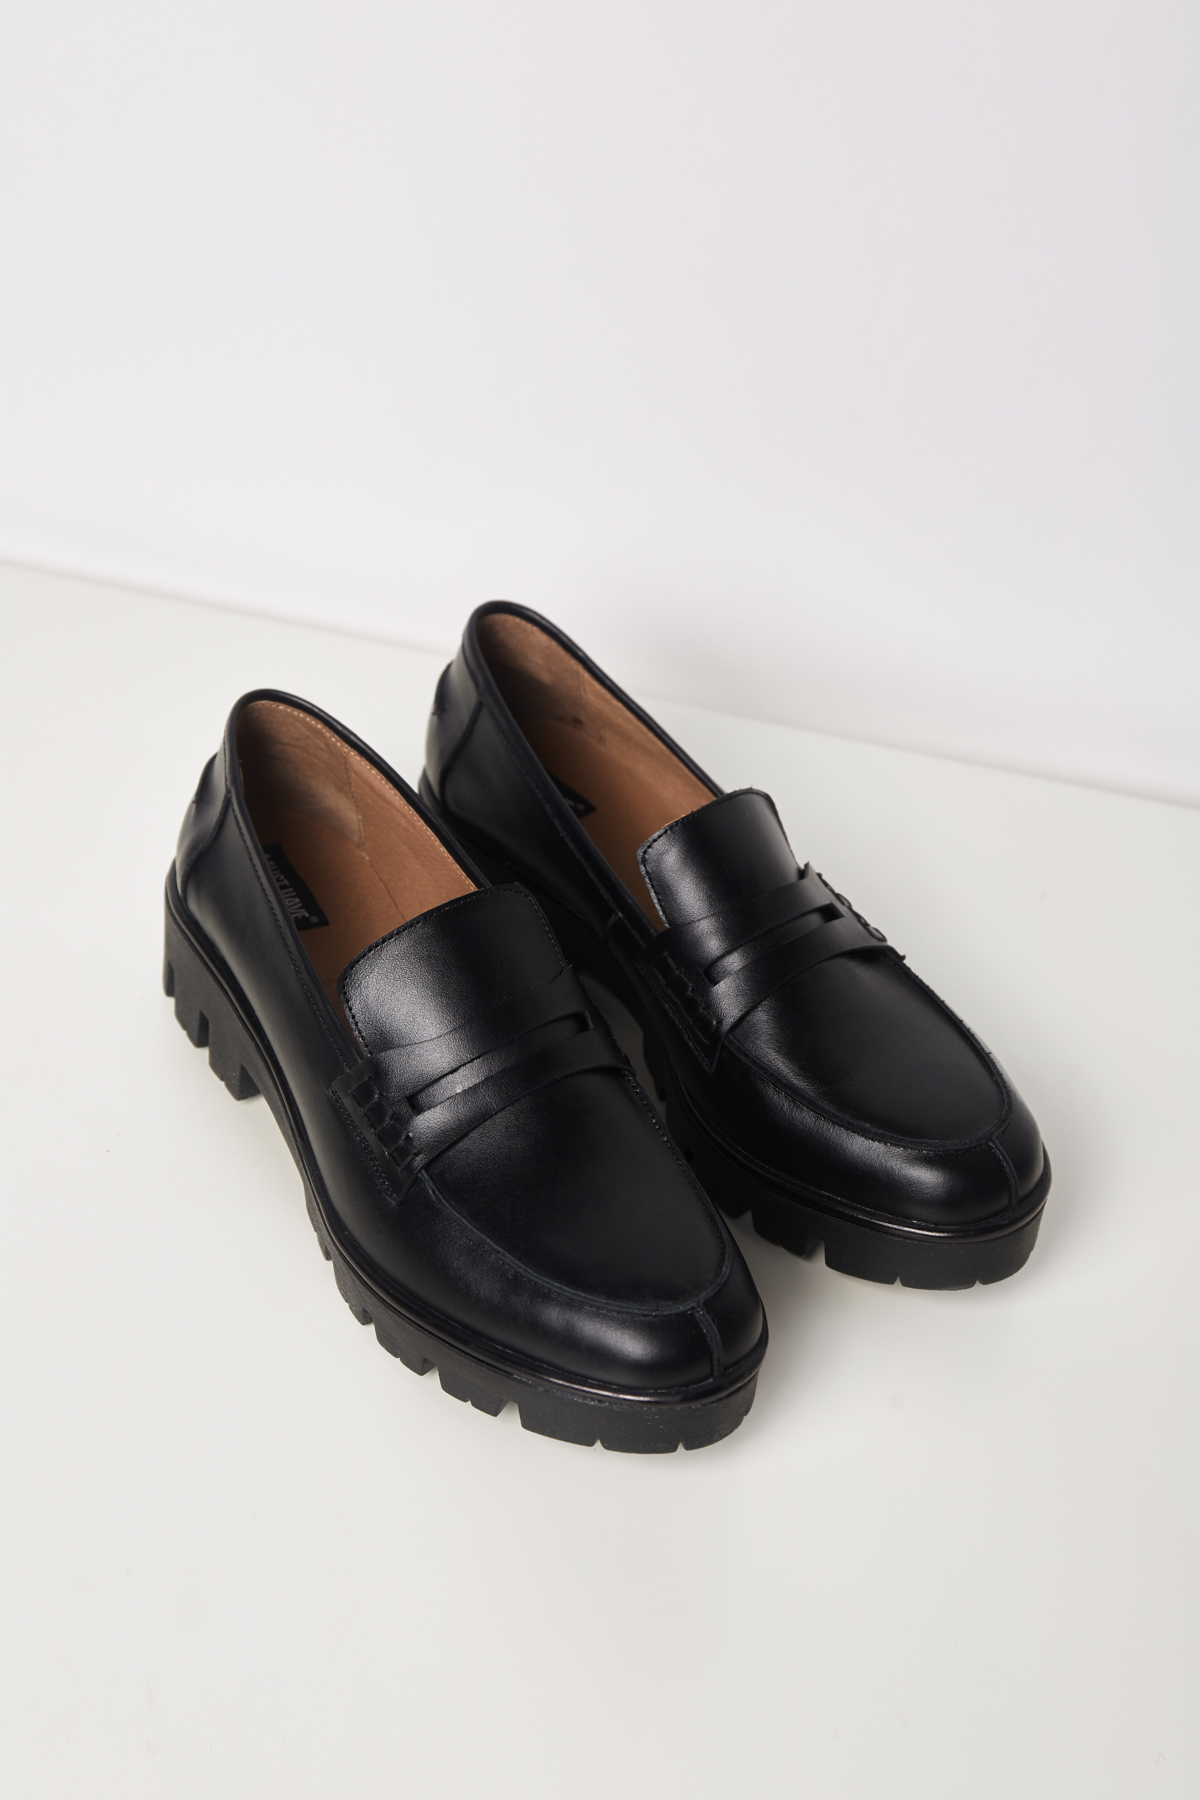 Black genuine leather loafers, photo 2